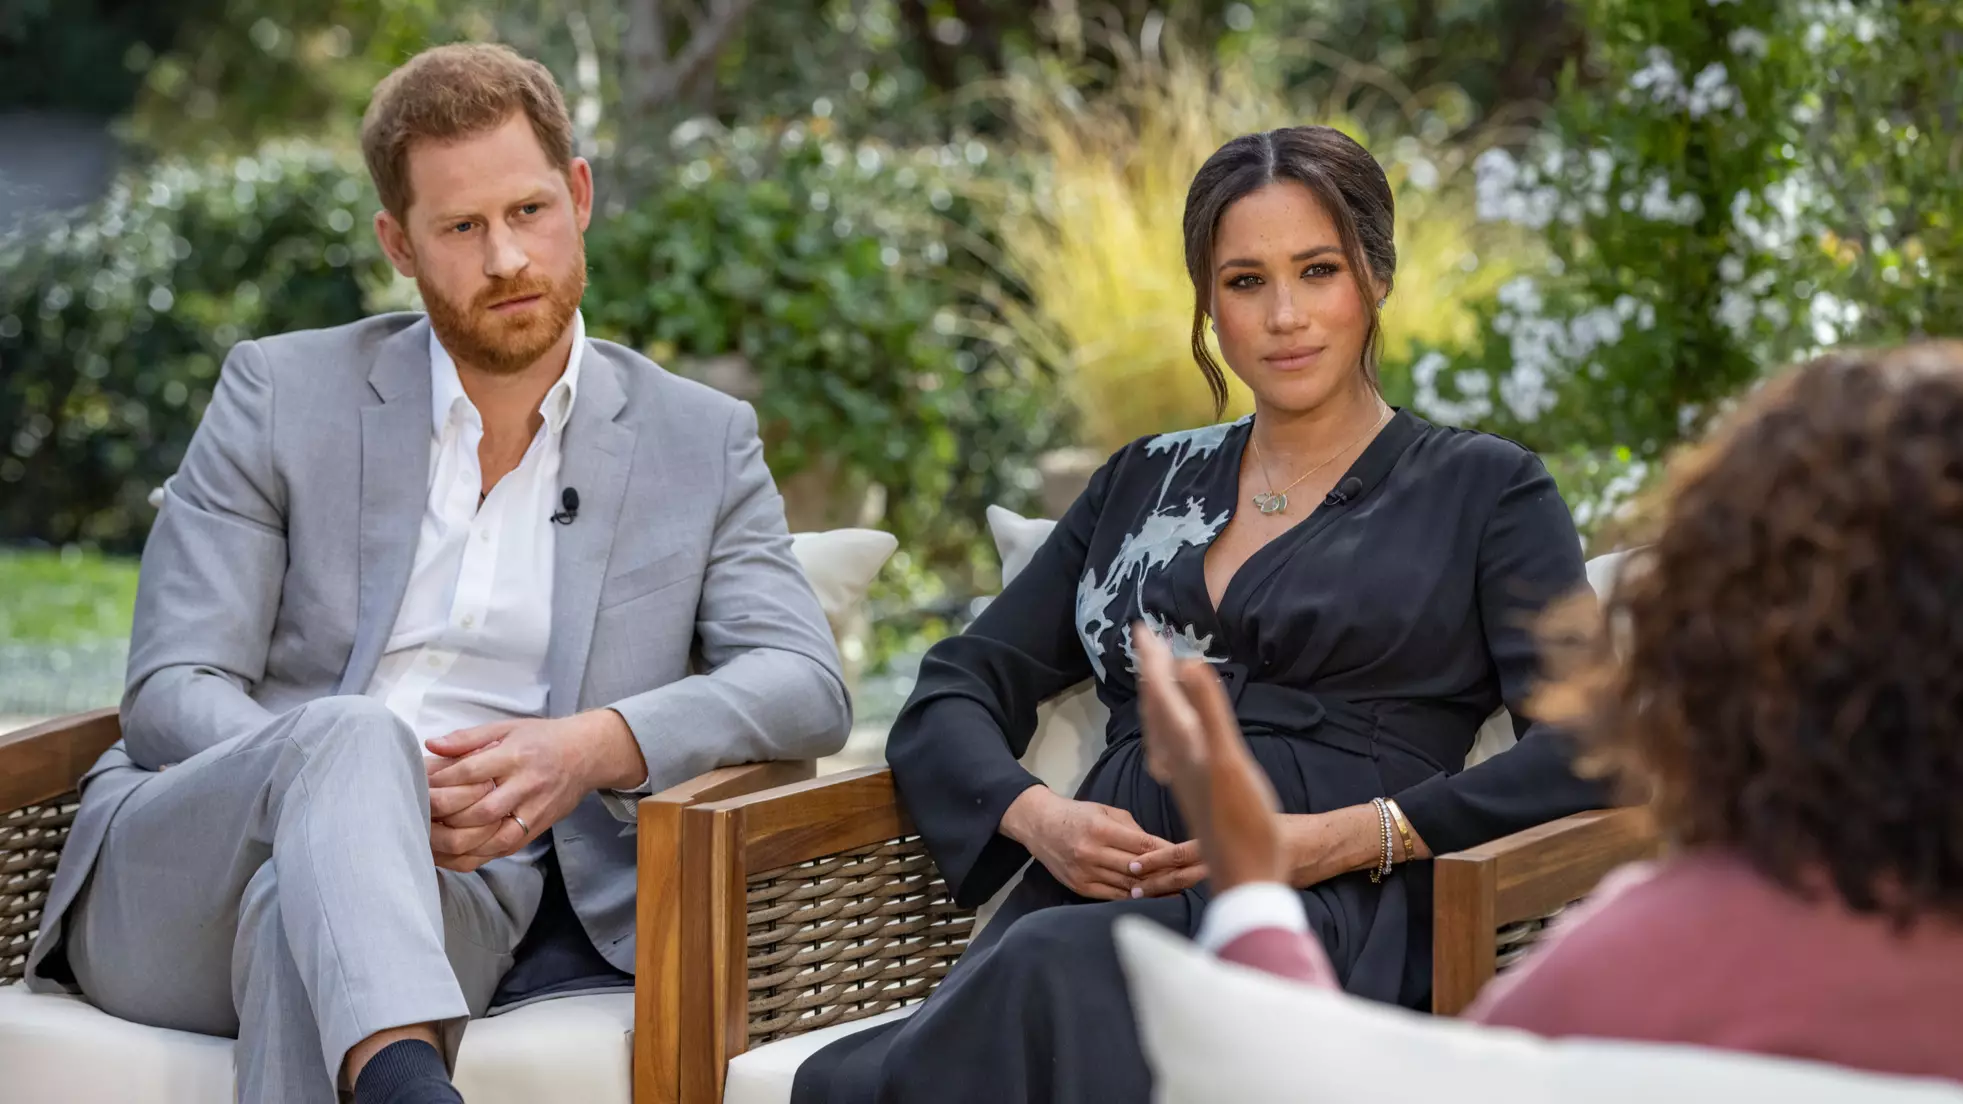 Harry And Meghan's Oprah Interview: Meghan Says She Feels 'Liberated'